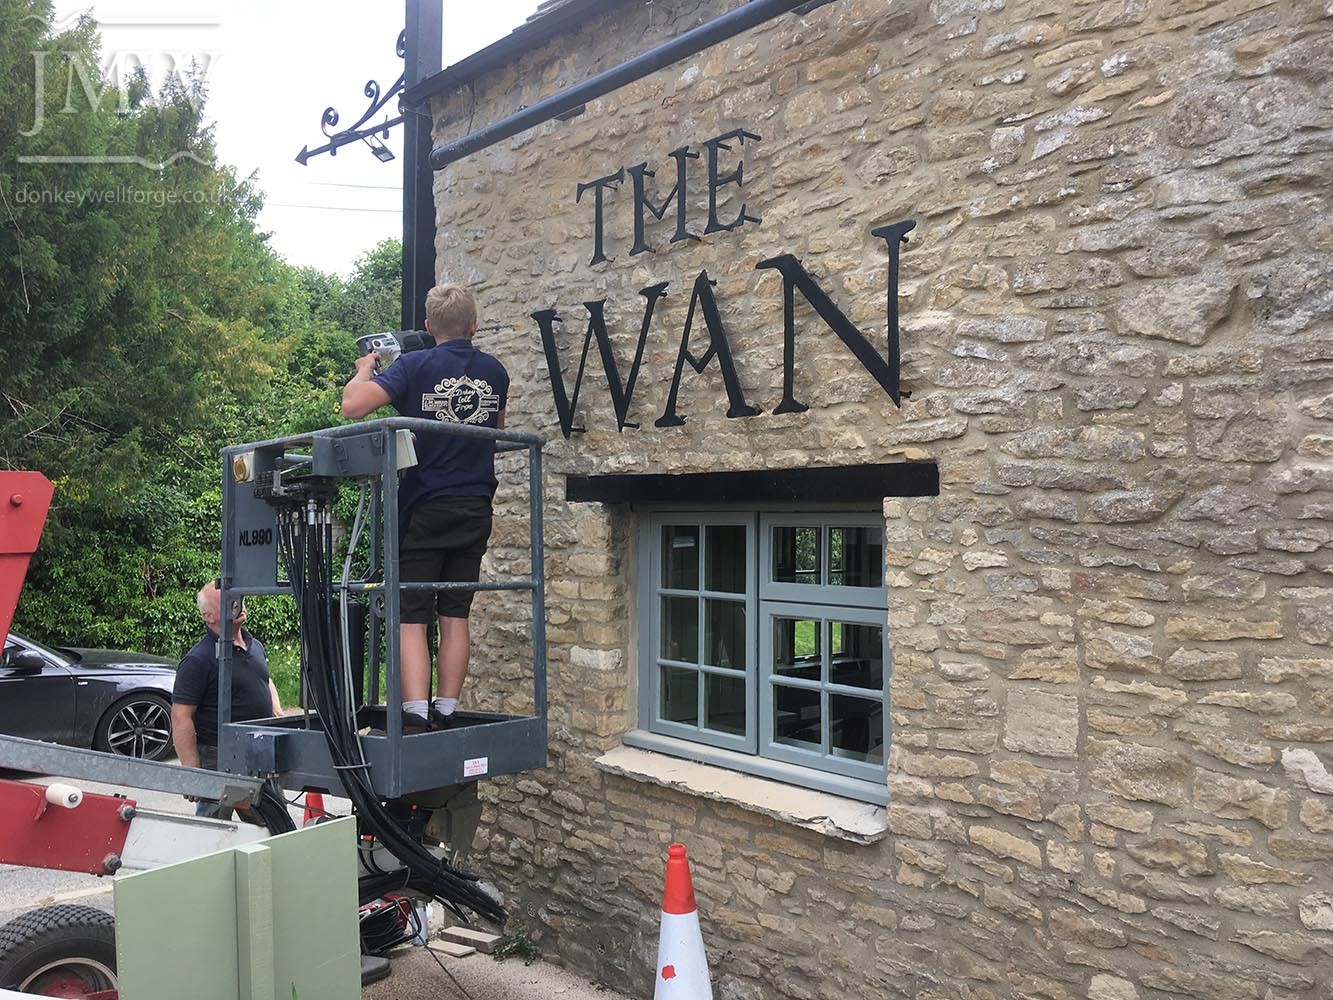 install-swan-signage-metalwork-cotswolds-pub